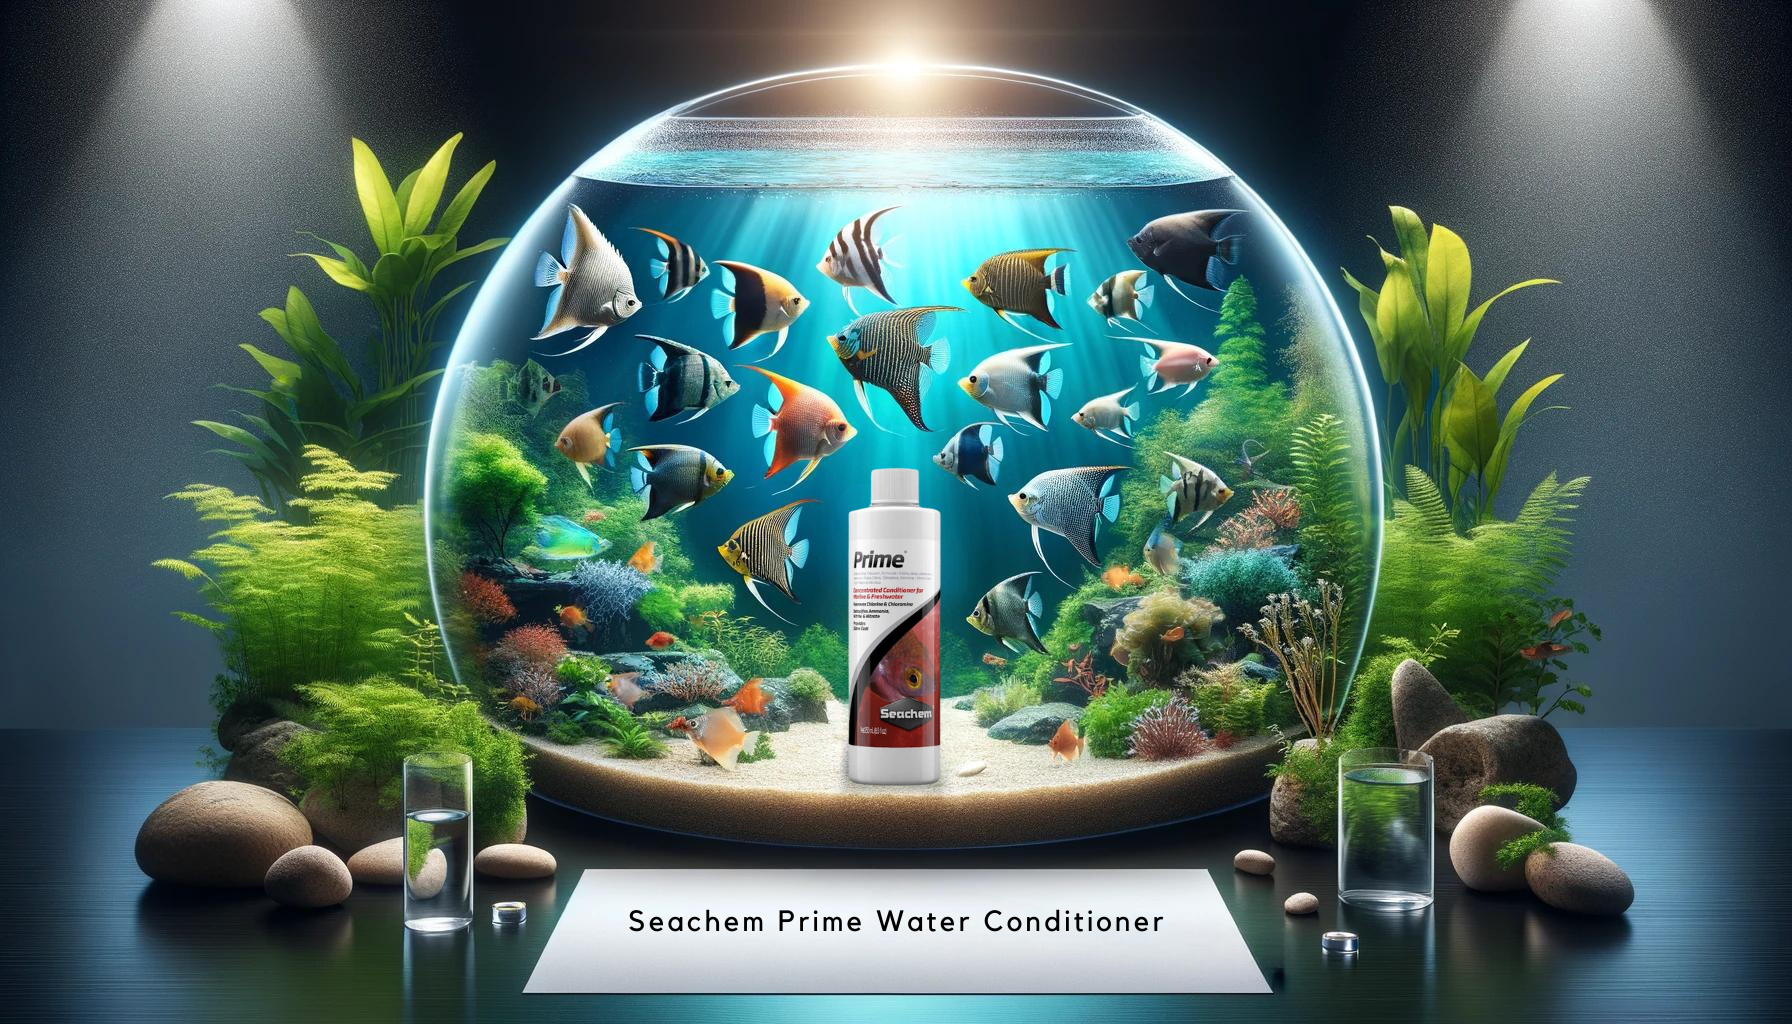 An artistically rendered spherical aquarium teeming with a variety of colorful freshwater angelfish and vibrant aquatic plants, centered around a bottle of Seachem Prime Water Conditioner, indicating its use for creating optimal water conditions for angelfish.